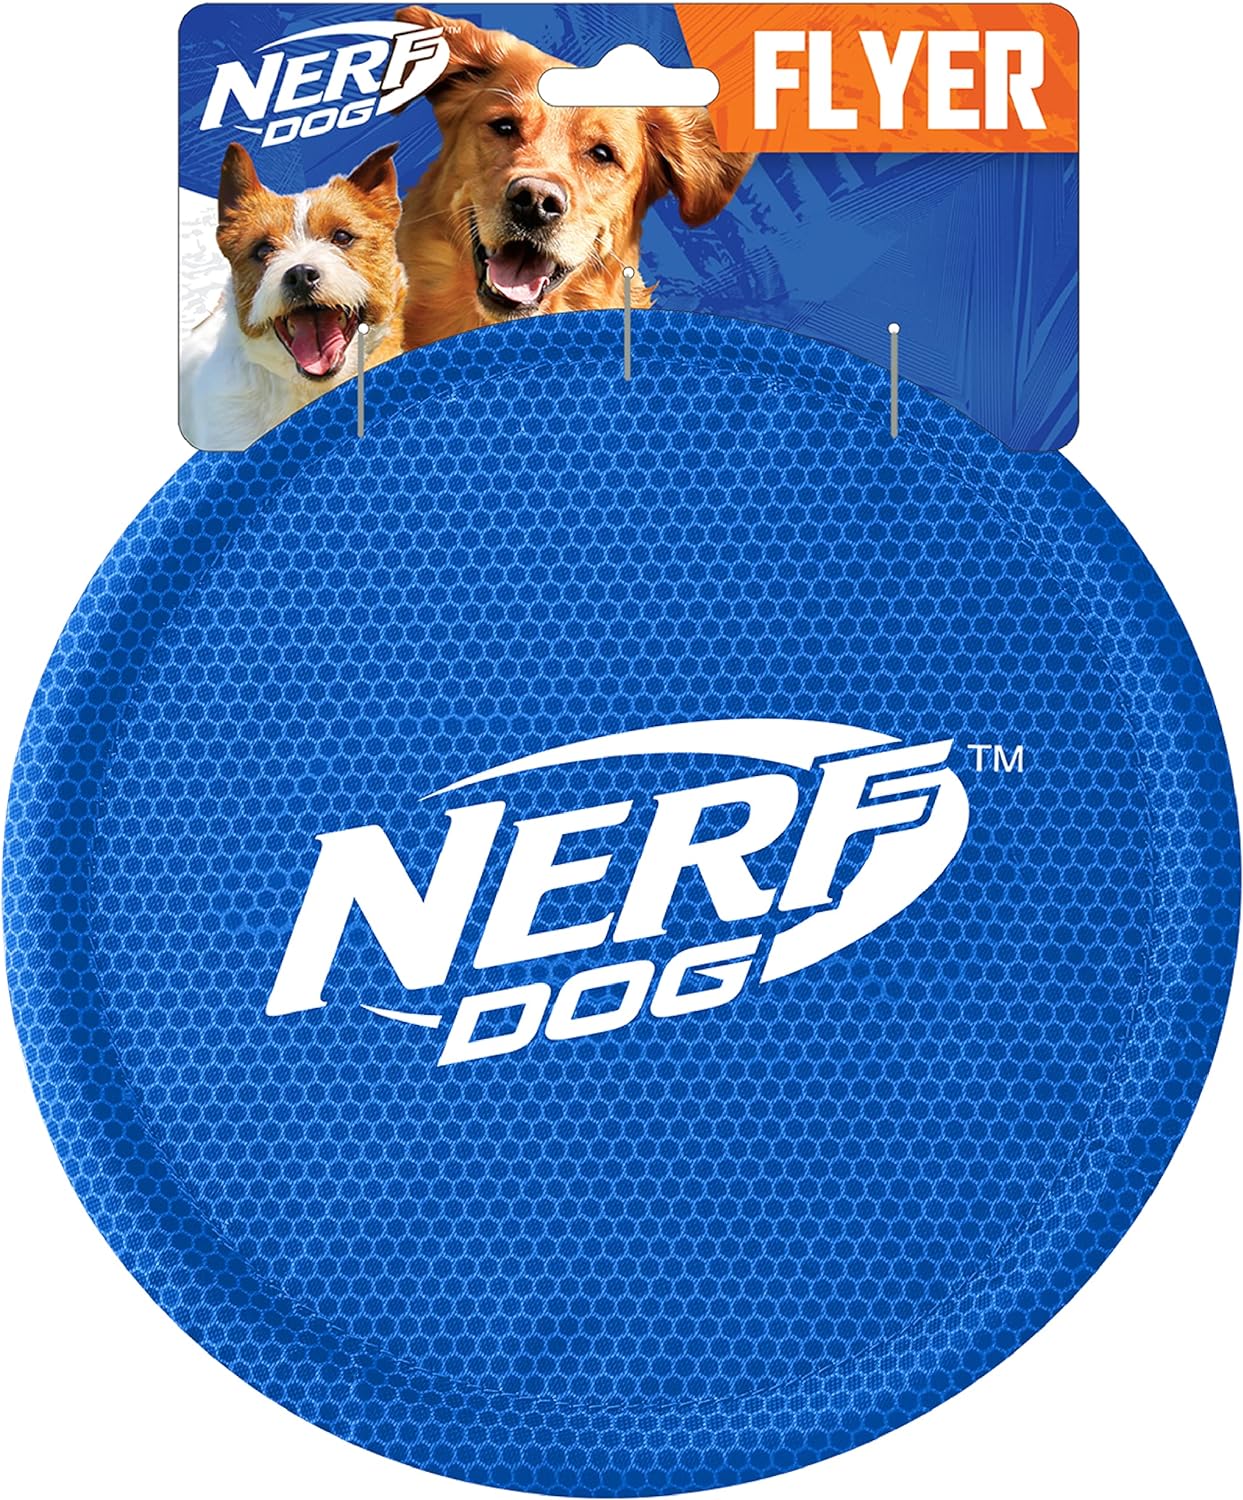 My dog has had one of these for about a year, and it is only now starting to fall apart. It was totally worth the money! My almost 3 year old male Chessie is extremely tough on frisbees - cracking a pro one or plastic dog one within three catches to the point you can't use it anymore. This, being nylon, is great because it is so flexible. It' easier on his mouth and he loves catching it and bringing it back. I don't let him keep it after we are done playing, though, and I do not allow him to pl